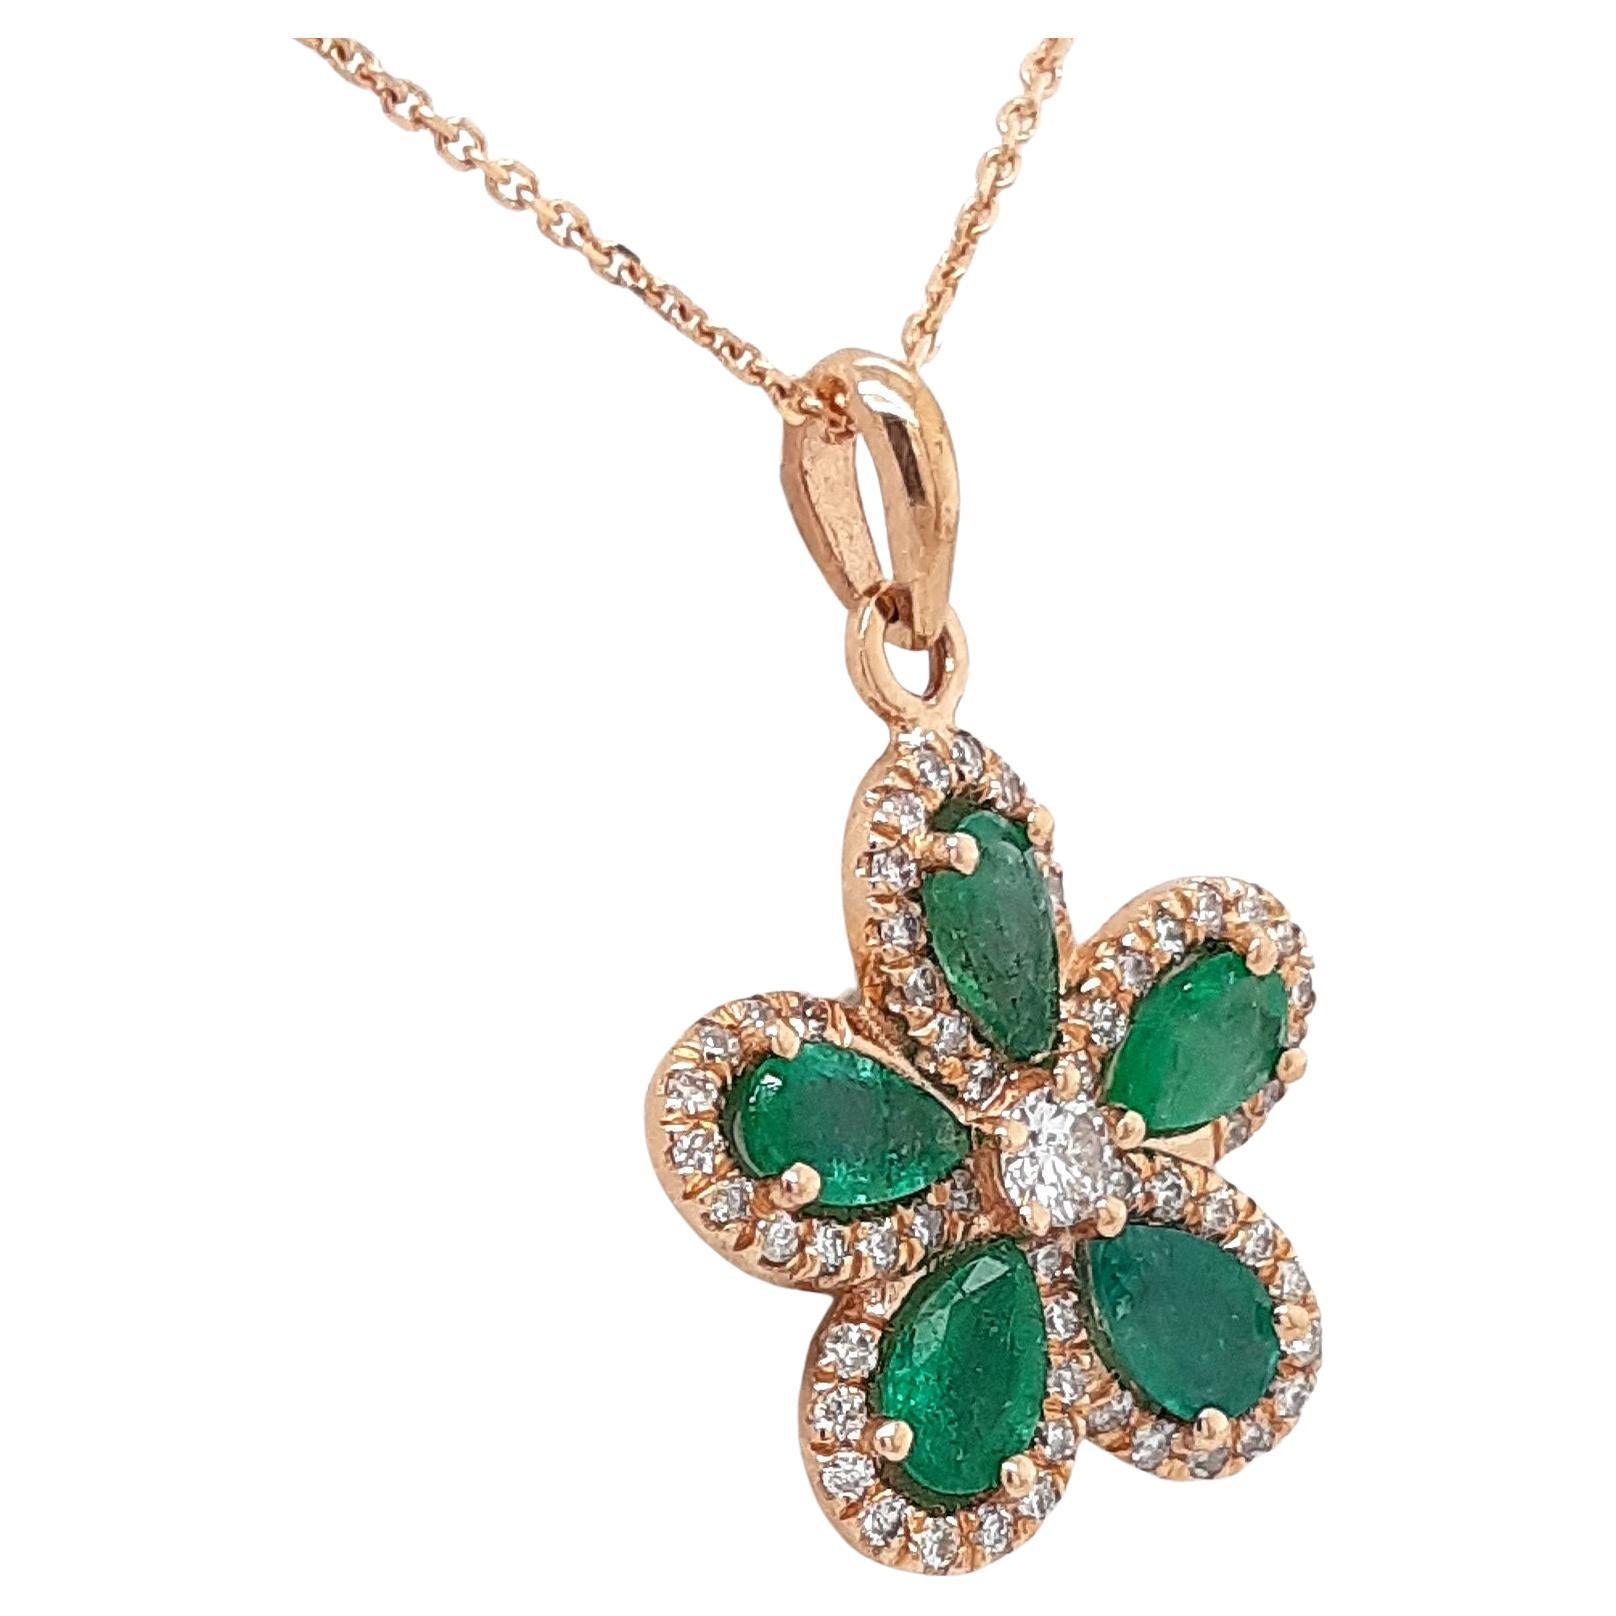 FOR U.S. BUYERS NO VAT 

This unique 14kt pink gold flower pendant features 5 intense green emeralds with a total of 1.00-carat weight surrounded by 56 round brilliant diamonds, totaling 0.32 carats. Each diamond is placed perfectly to create a